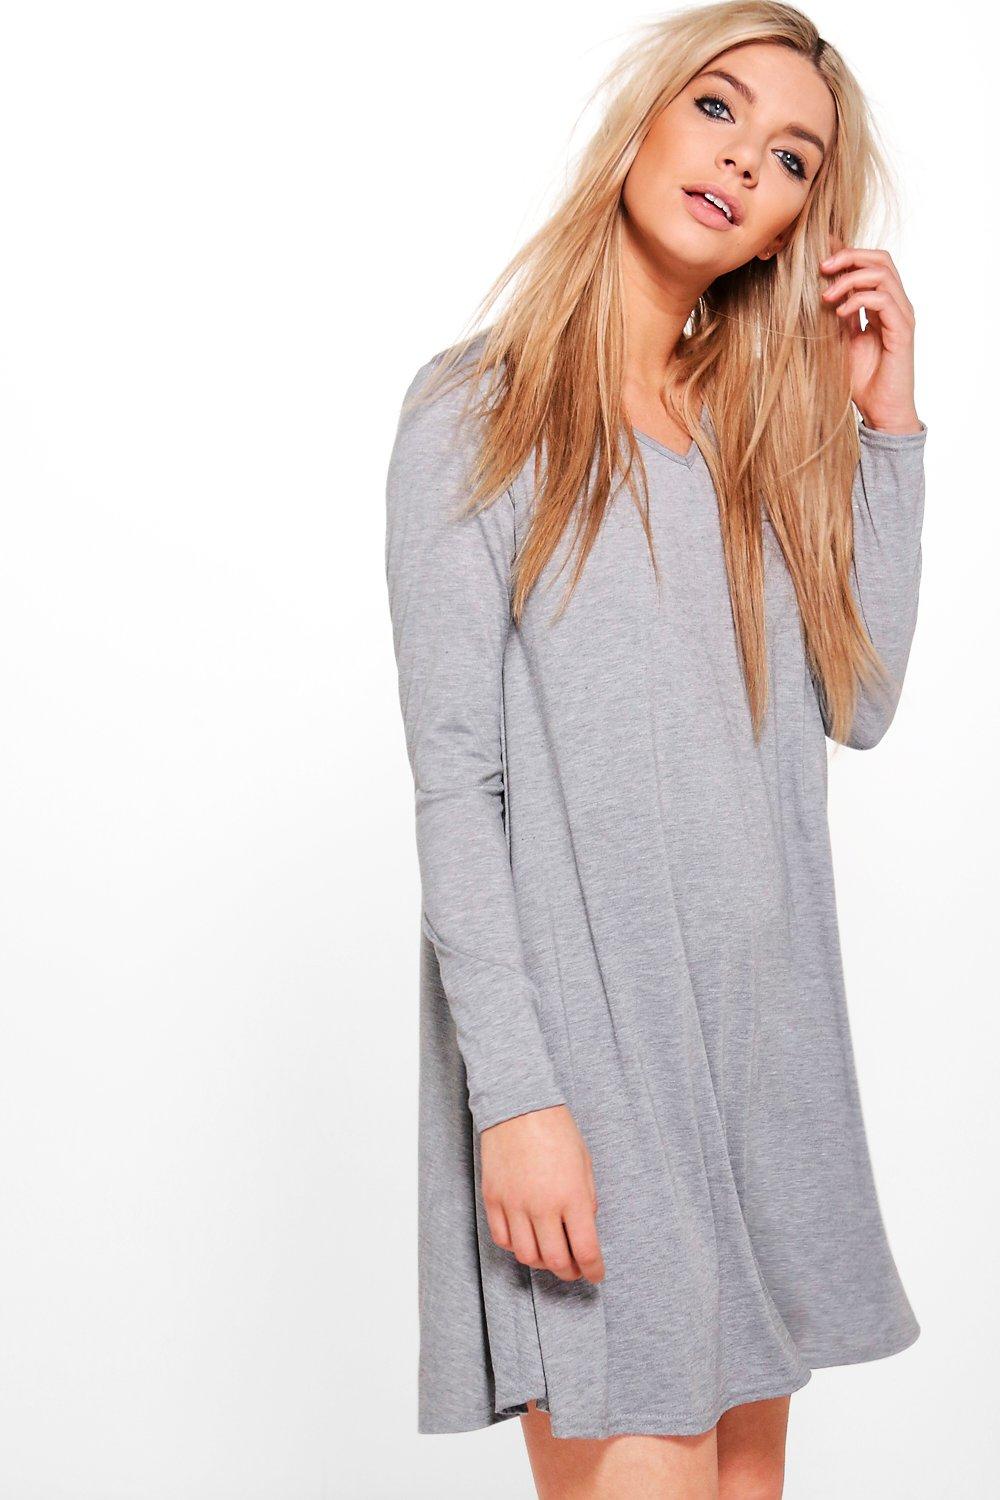 black and silver long sleeve dress